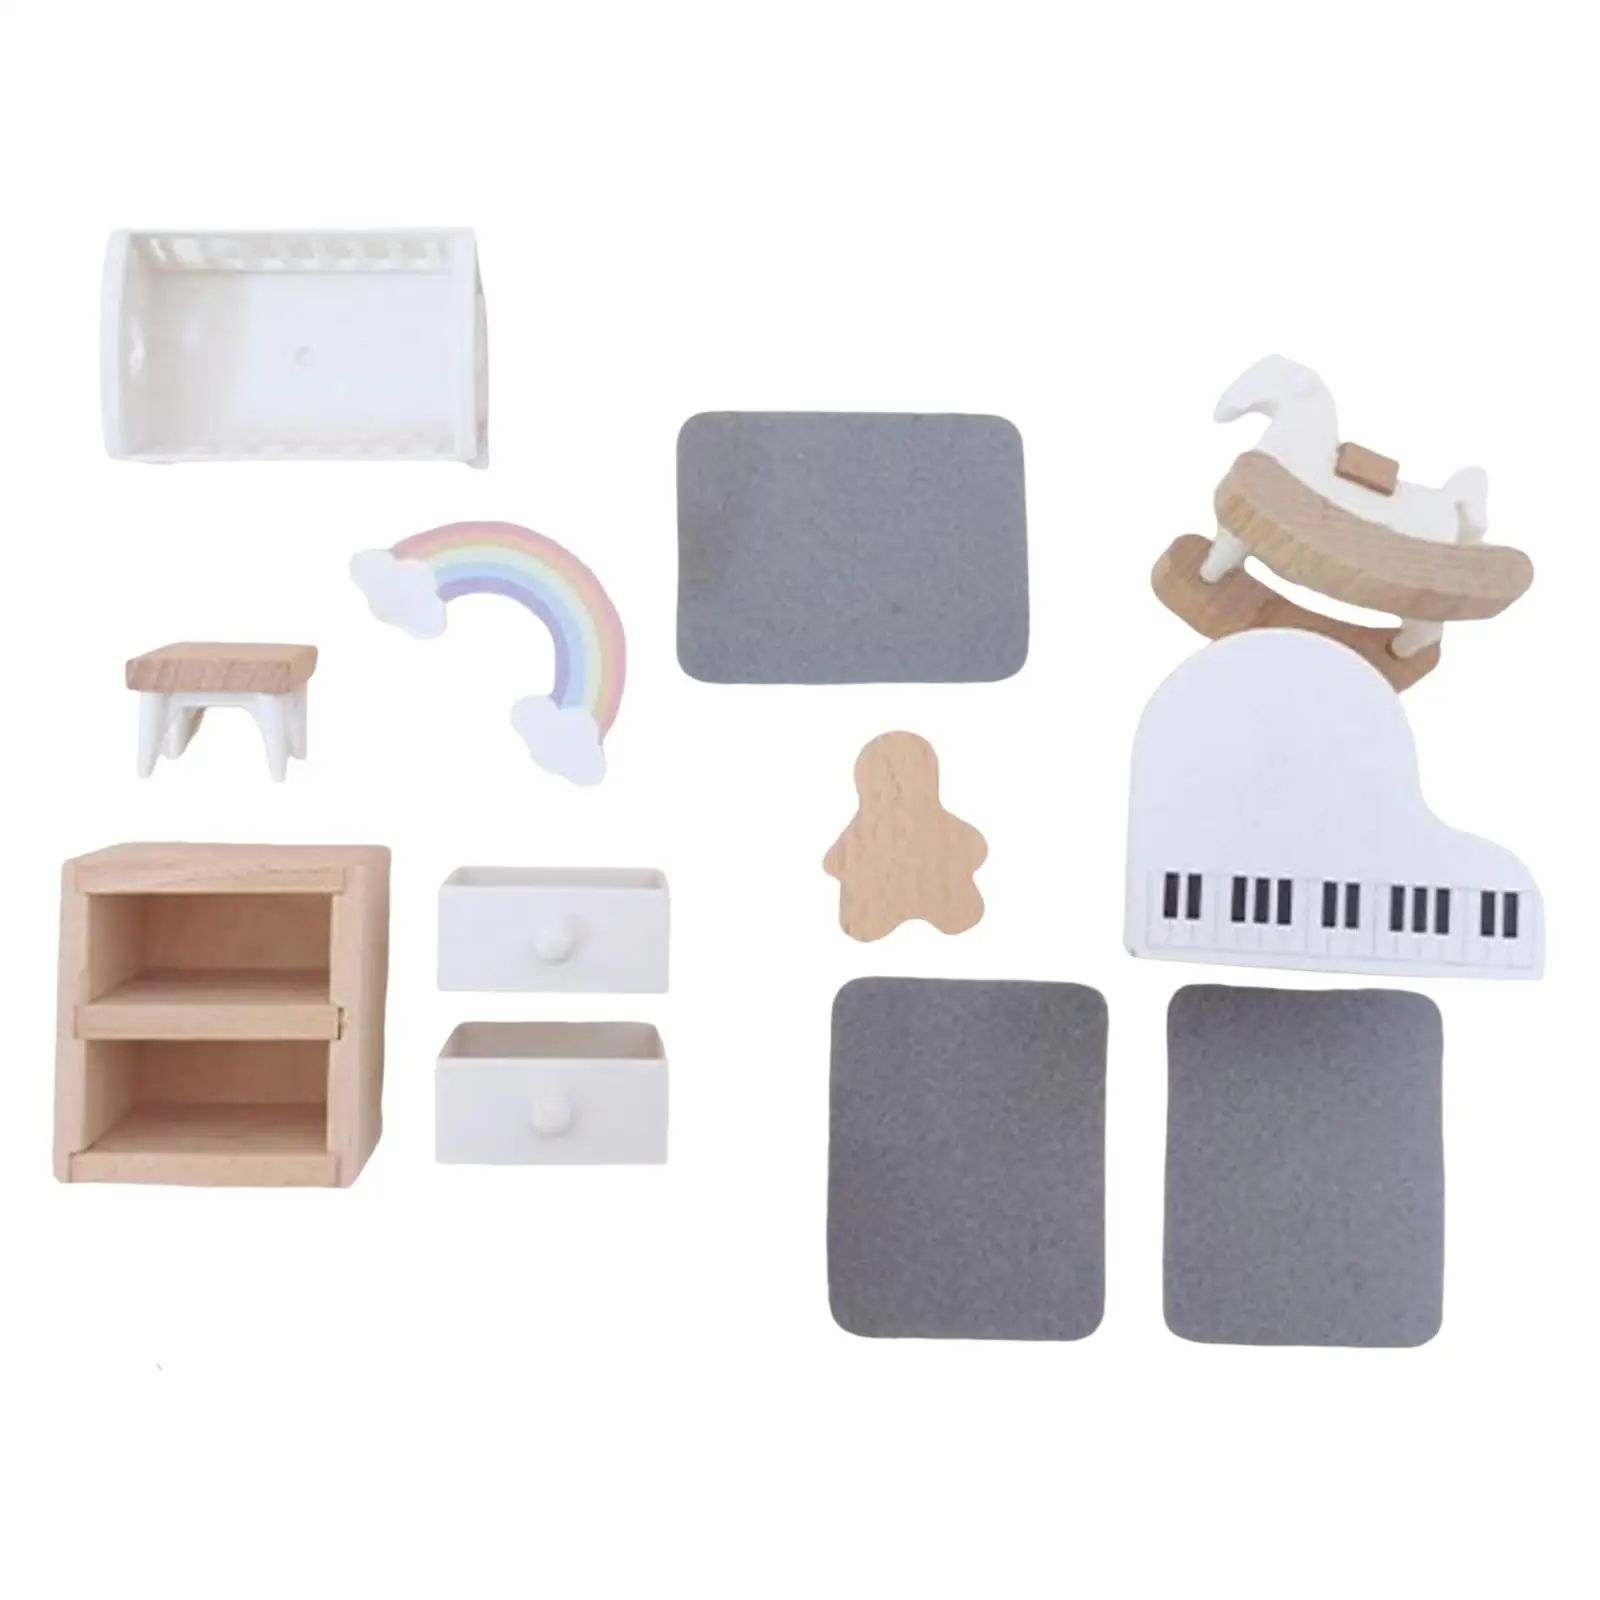 Doll House Furniture Kit Scene Layout Retro Style DIY Photo Props Fashion 1:12 for Kids Decoration Ornament Tabletop